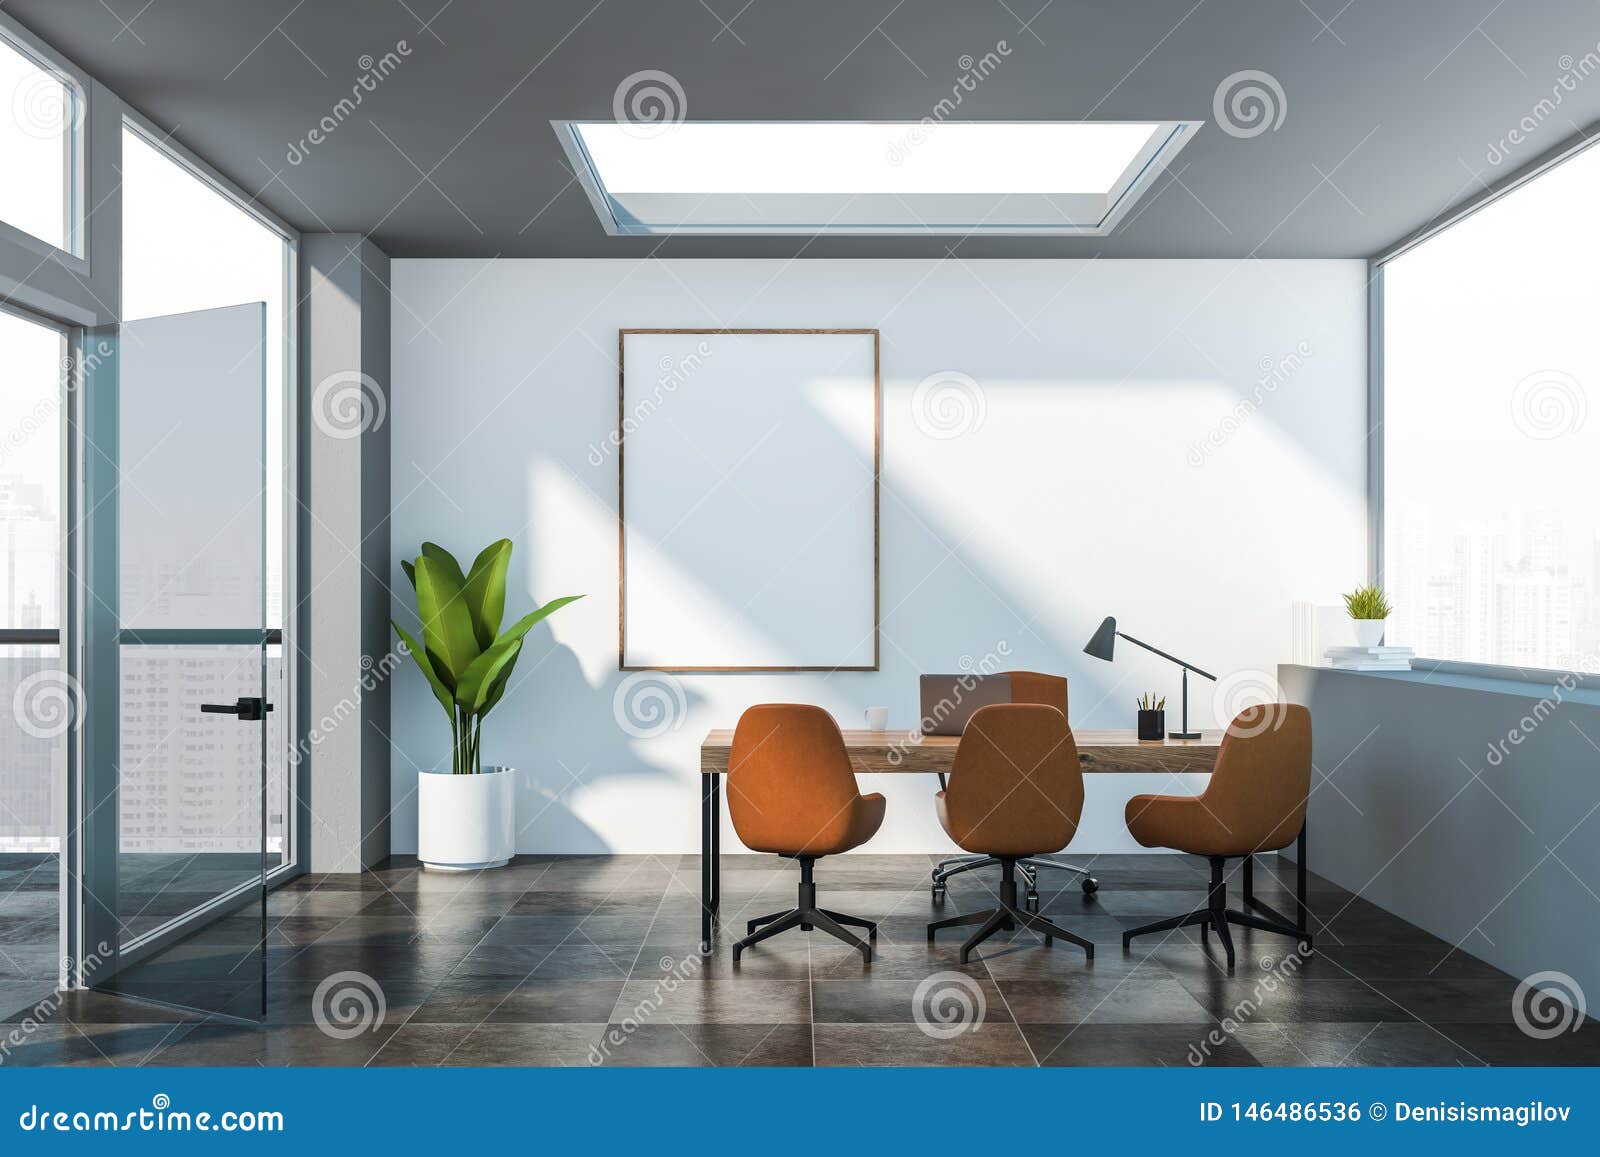 White Manager Office Interior With Poster Stock Illustration